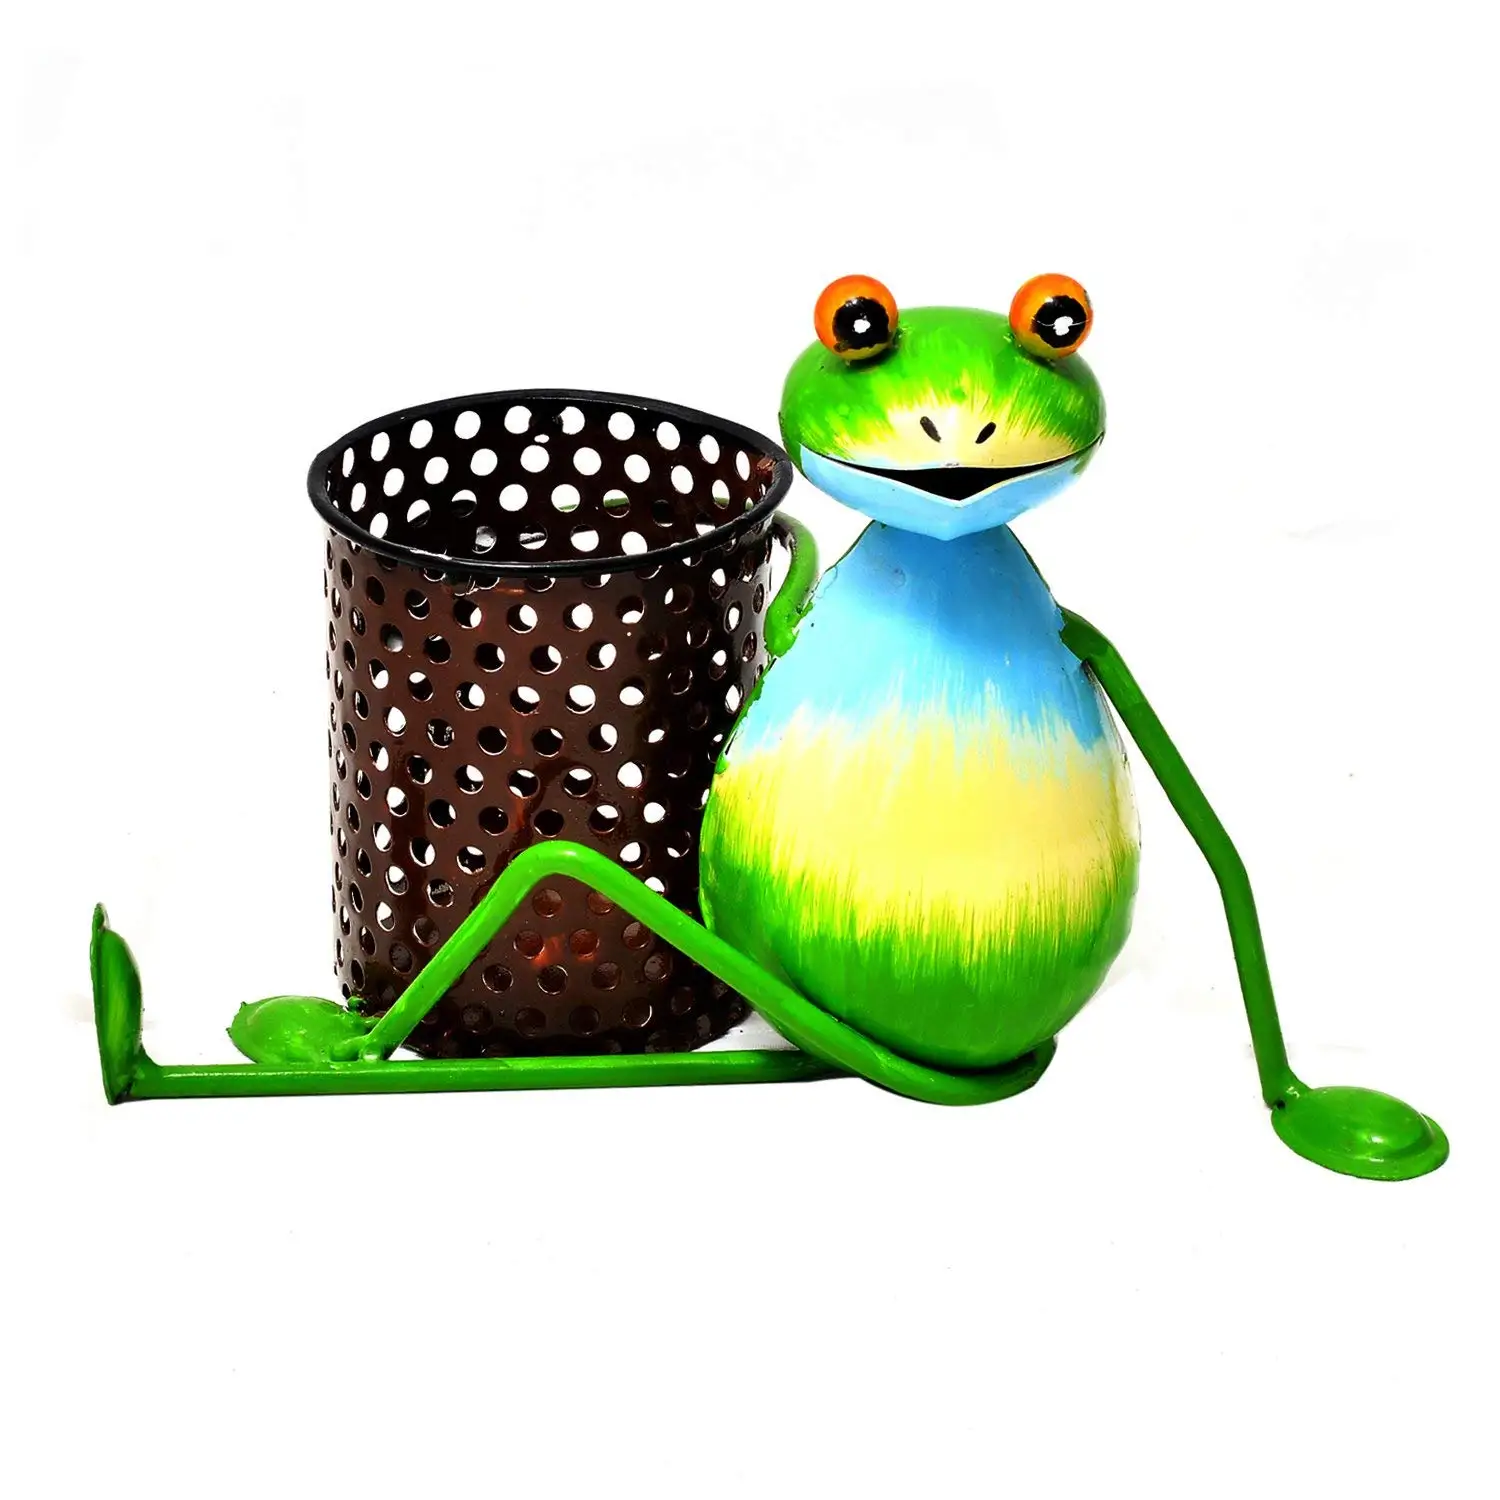 Cheap Frog Brush Find Frog Brush Deals On Line At Alibaba Com